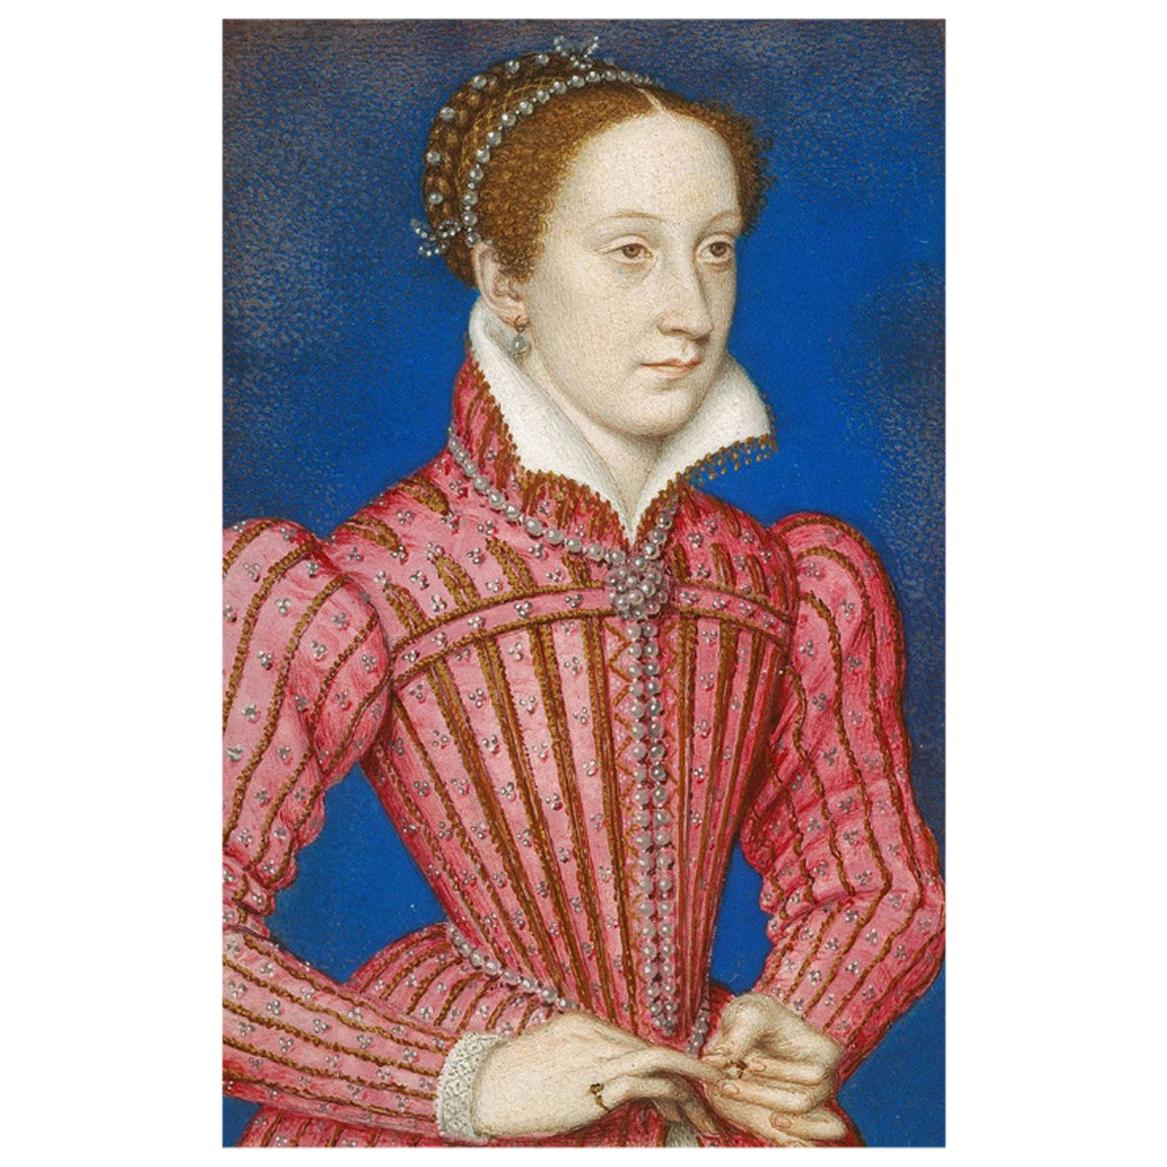 Mary, Queen of Scots Authentic Antique Strand of Hair, 16th Century